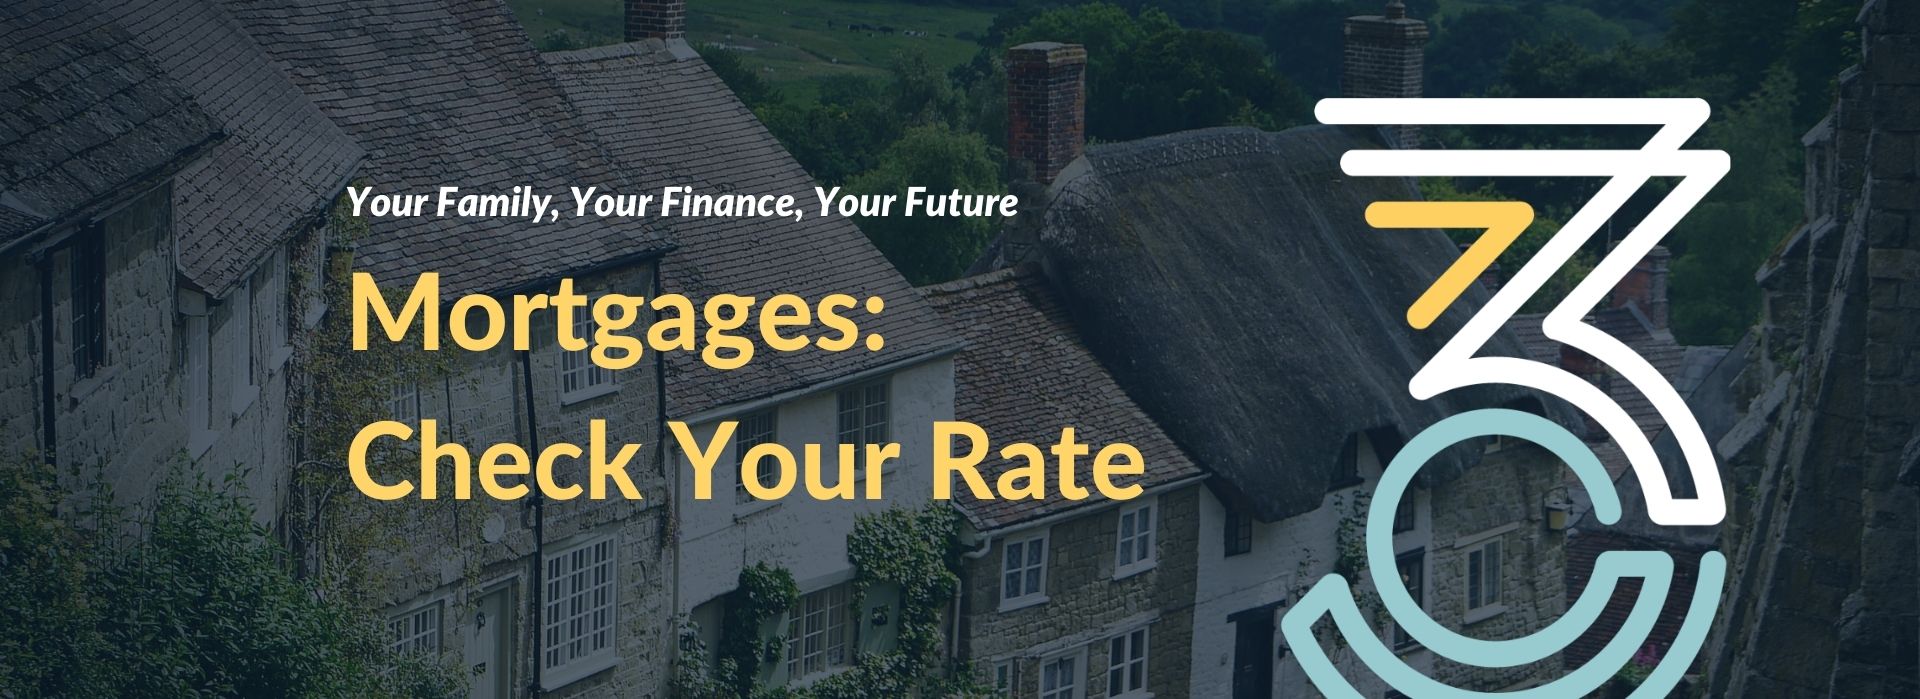 Mortgages: Check Your Rate